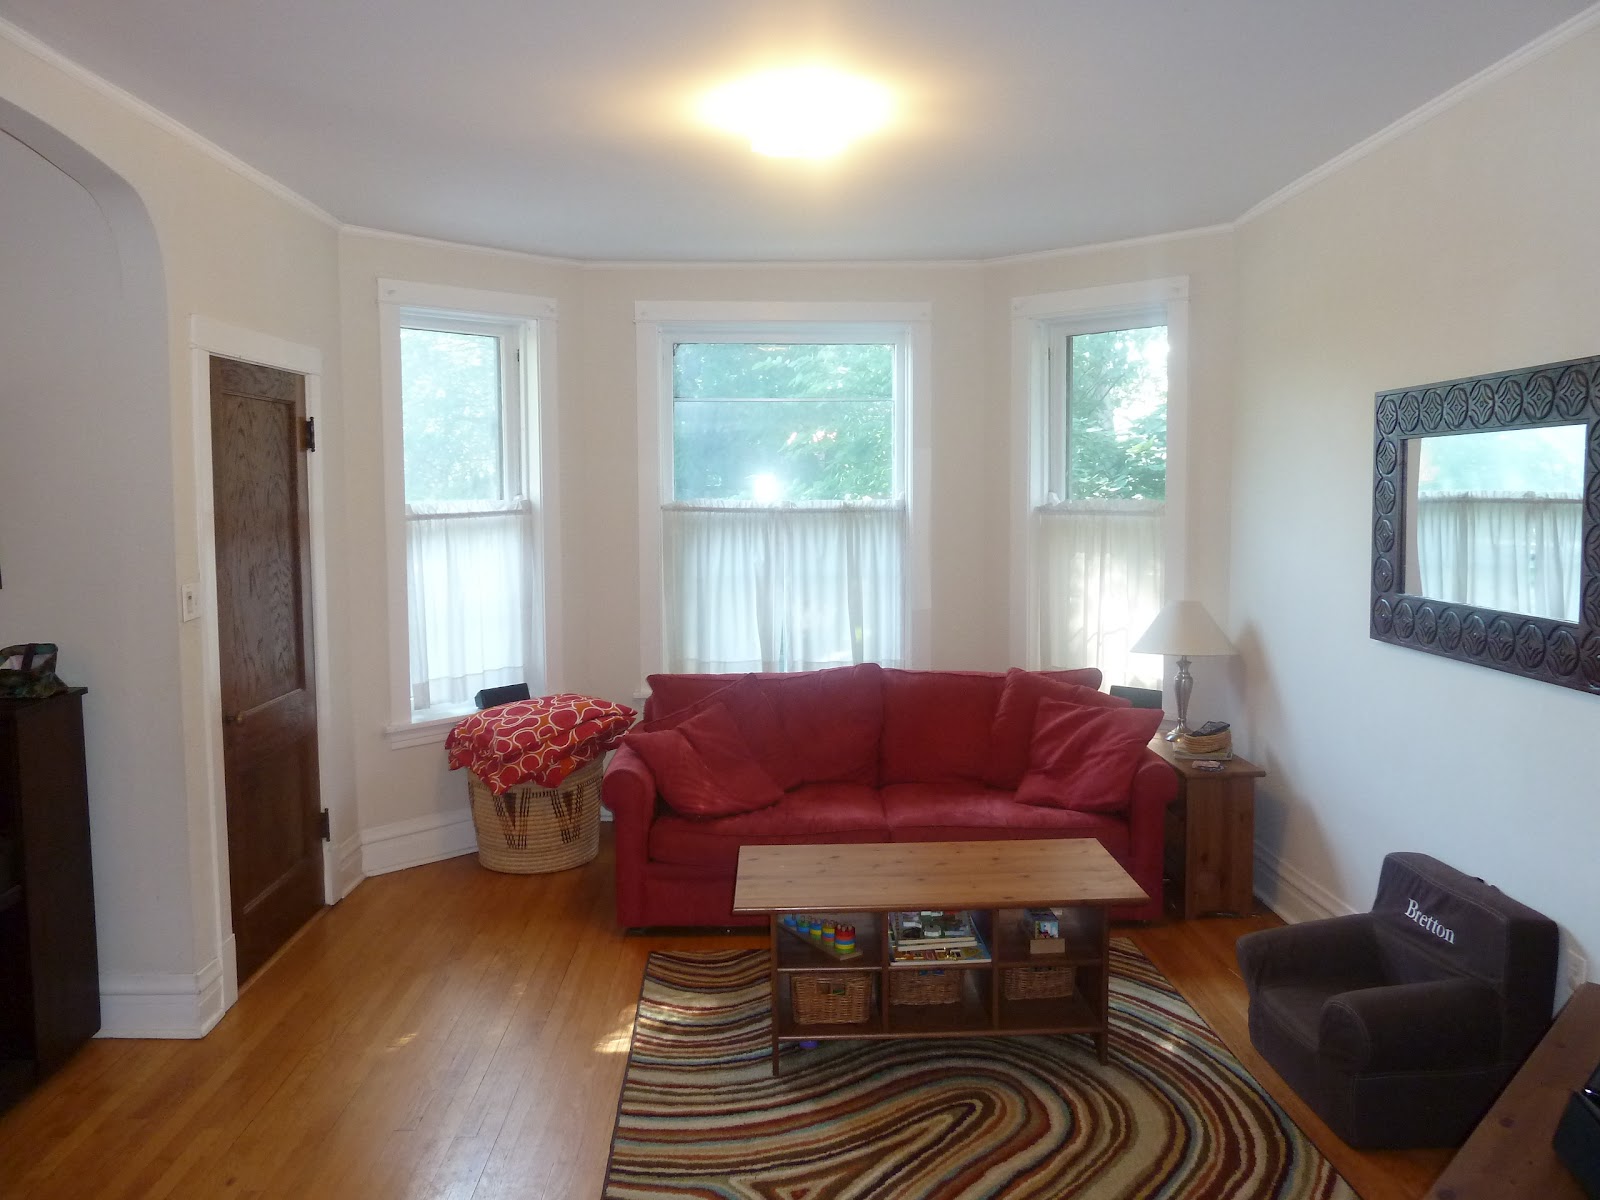 The Chicago Real Estate Local: NEW: Lincoln Square House for Rent $2,900 a month